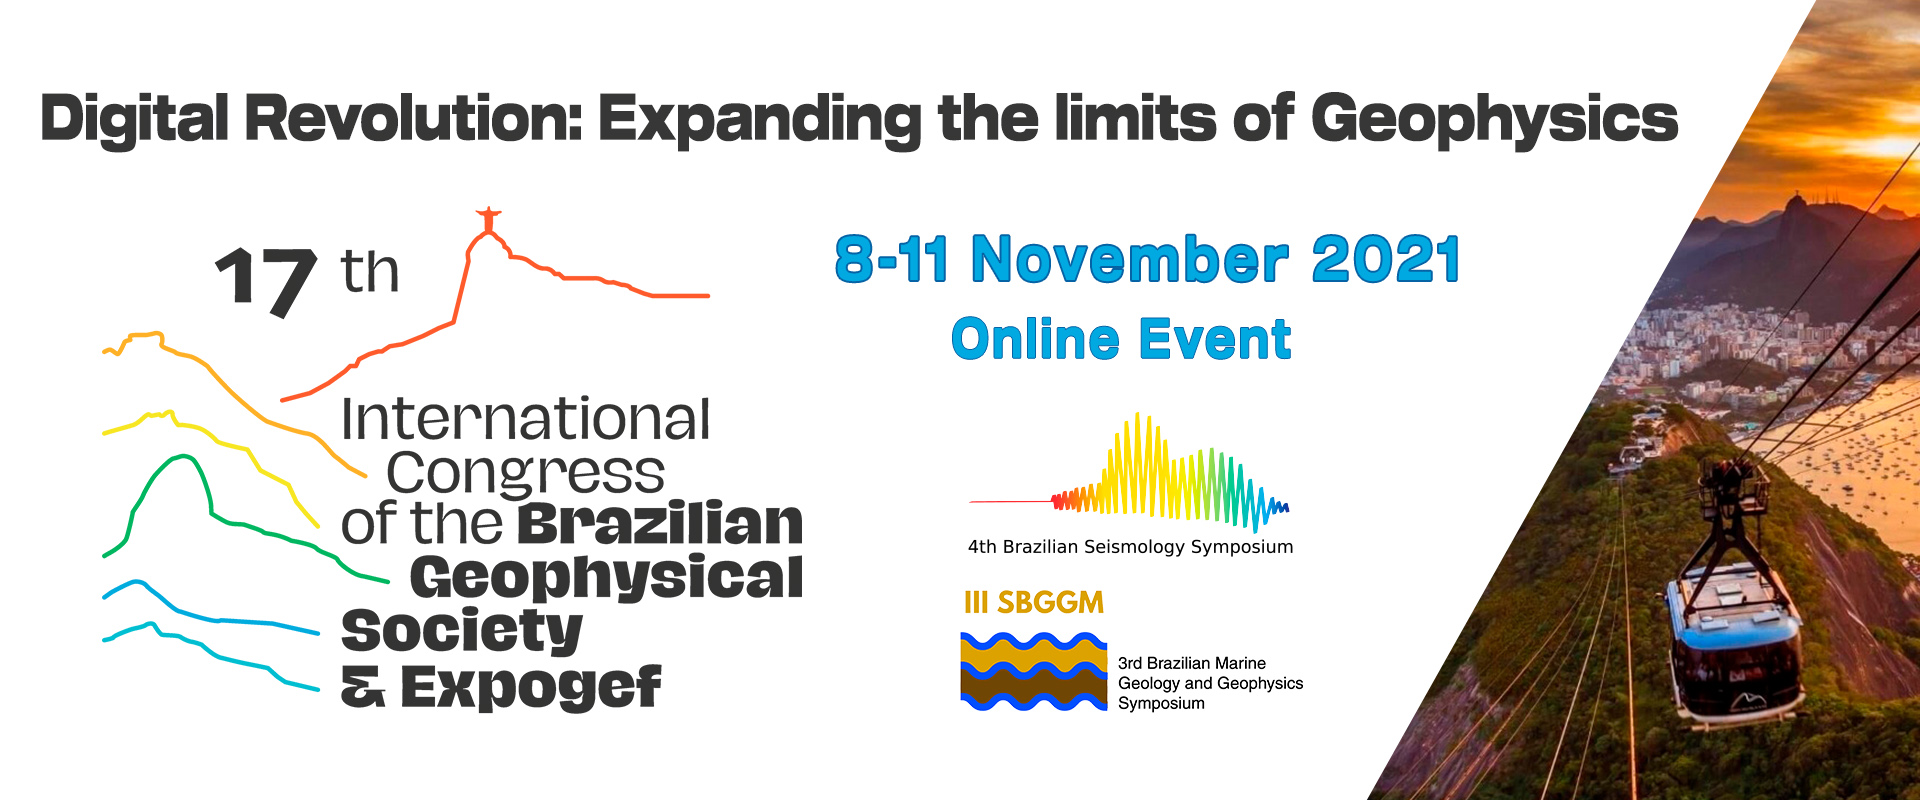 17th International Congress of the Brazilian Geophysical Society and EXPOGEf